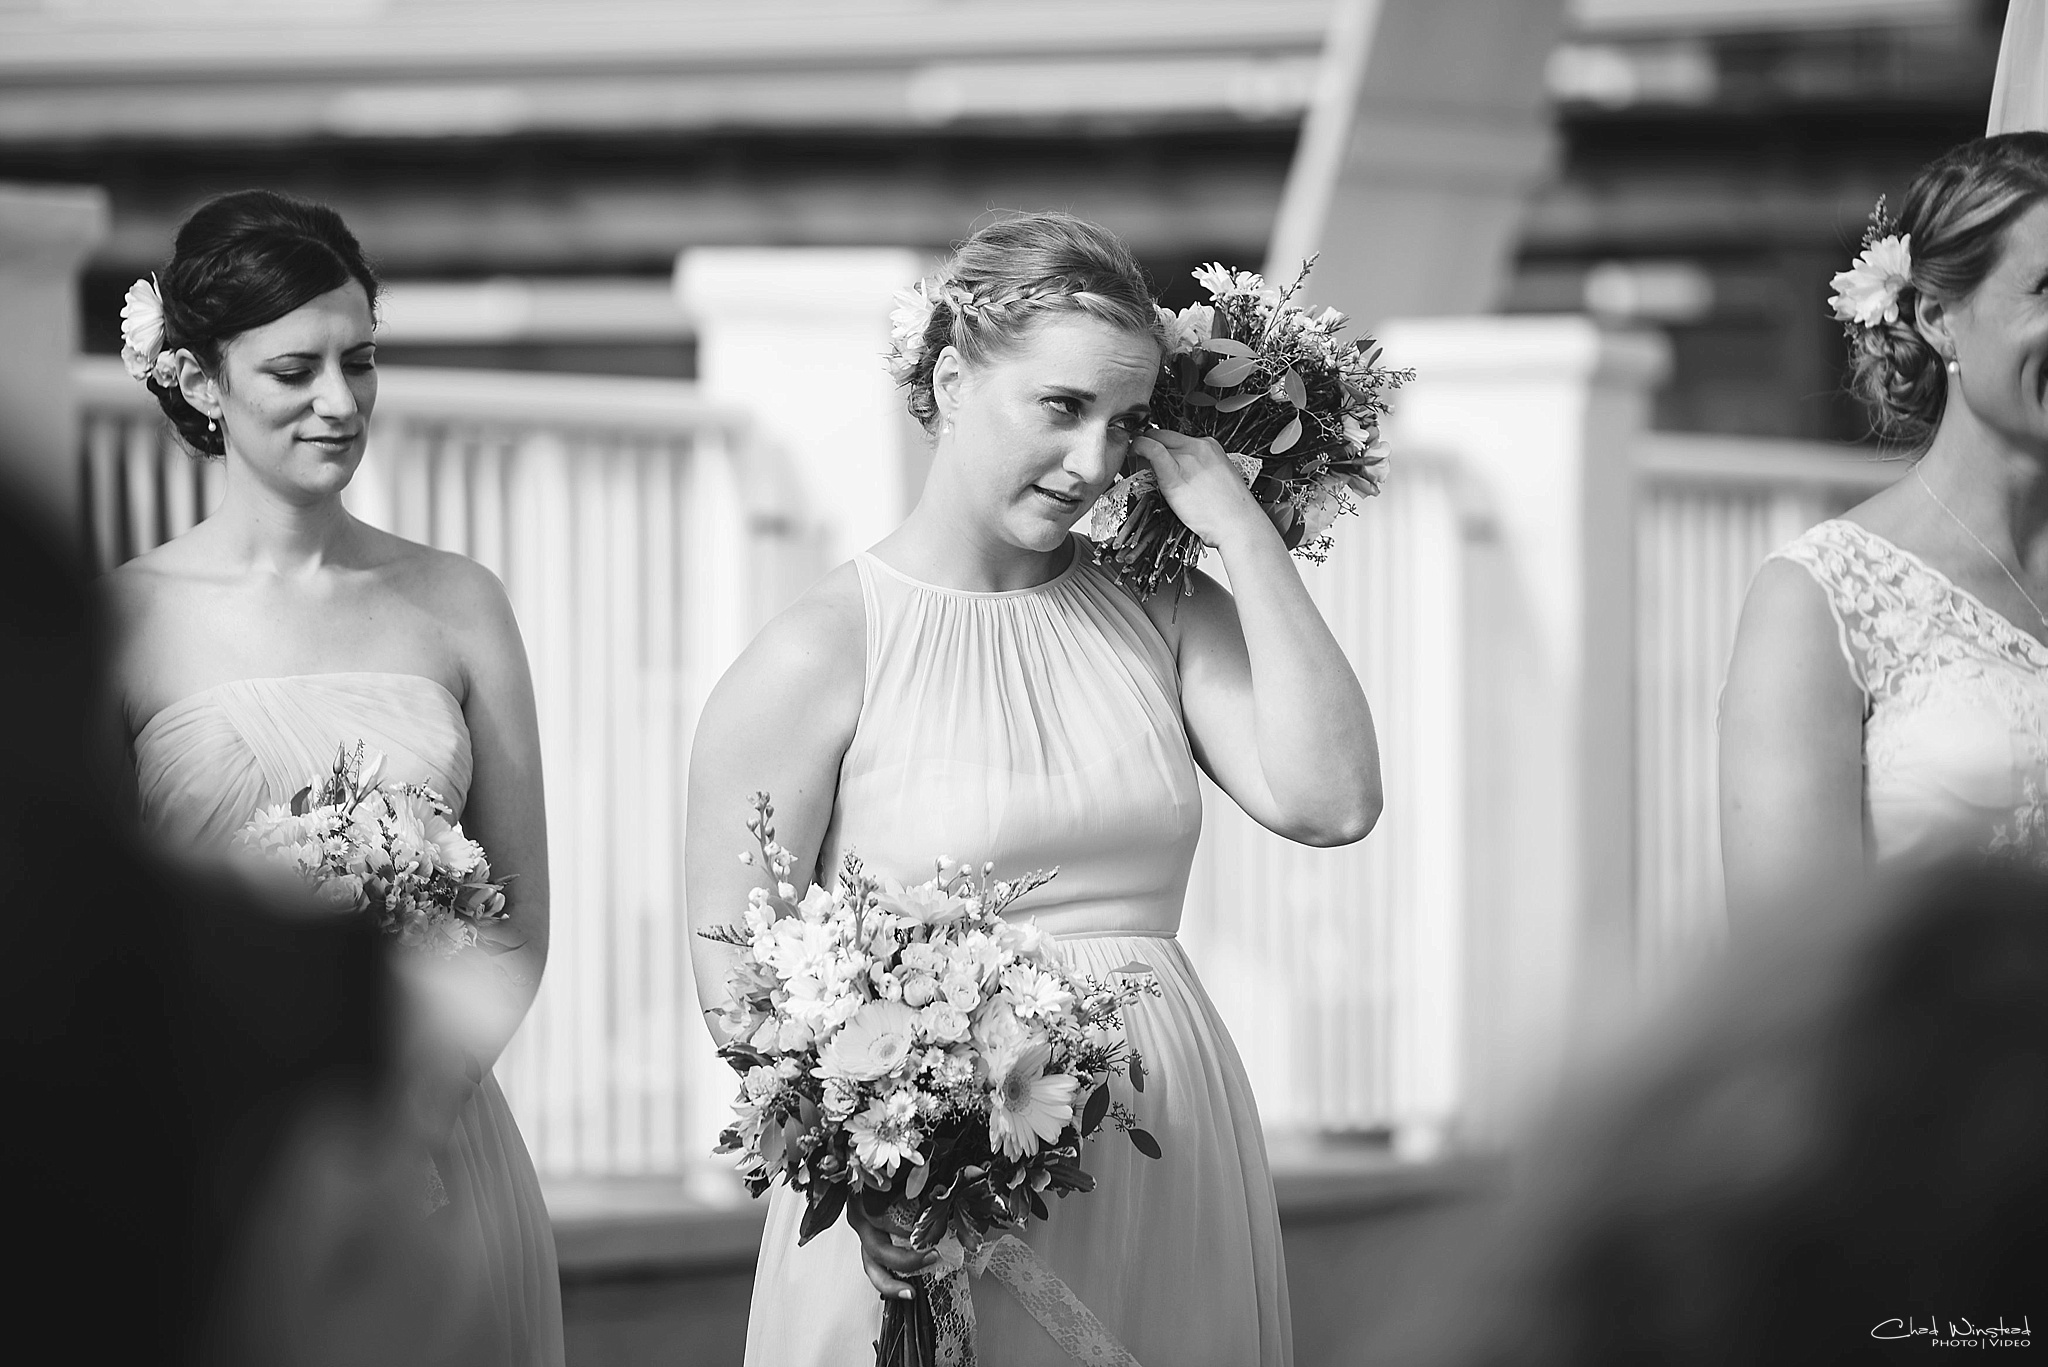  Tiffany & Justin's Wedding at the Islander Hotel and Suites in Emerald Isle, NC by Chad Winstead Photography 